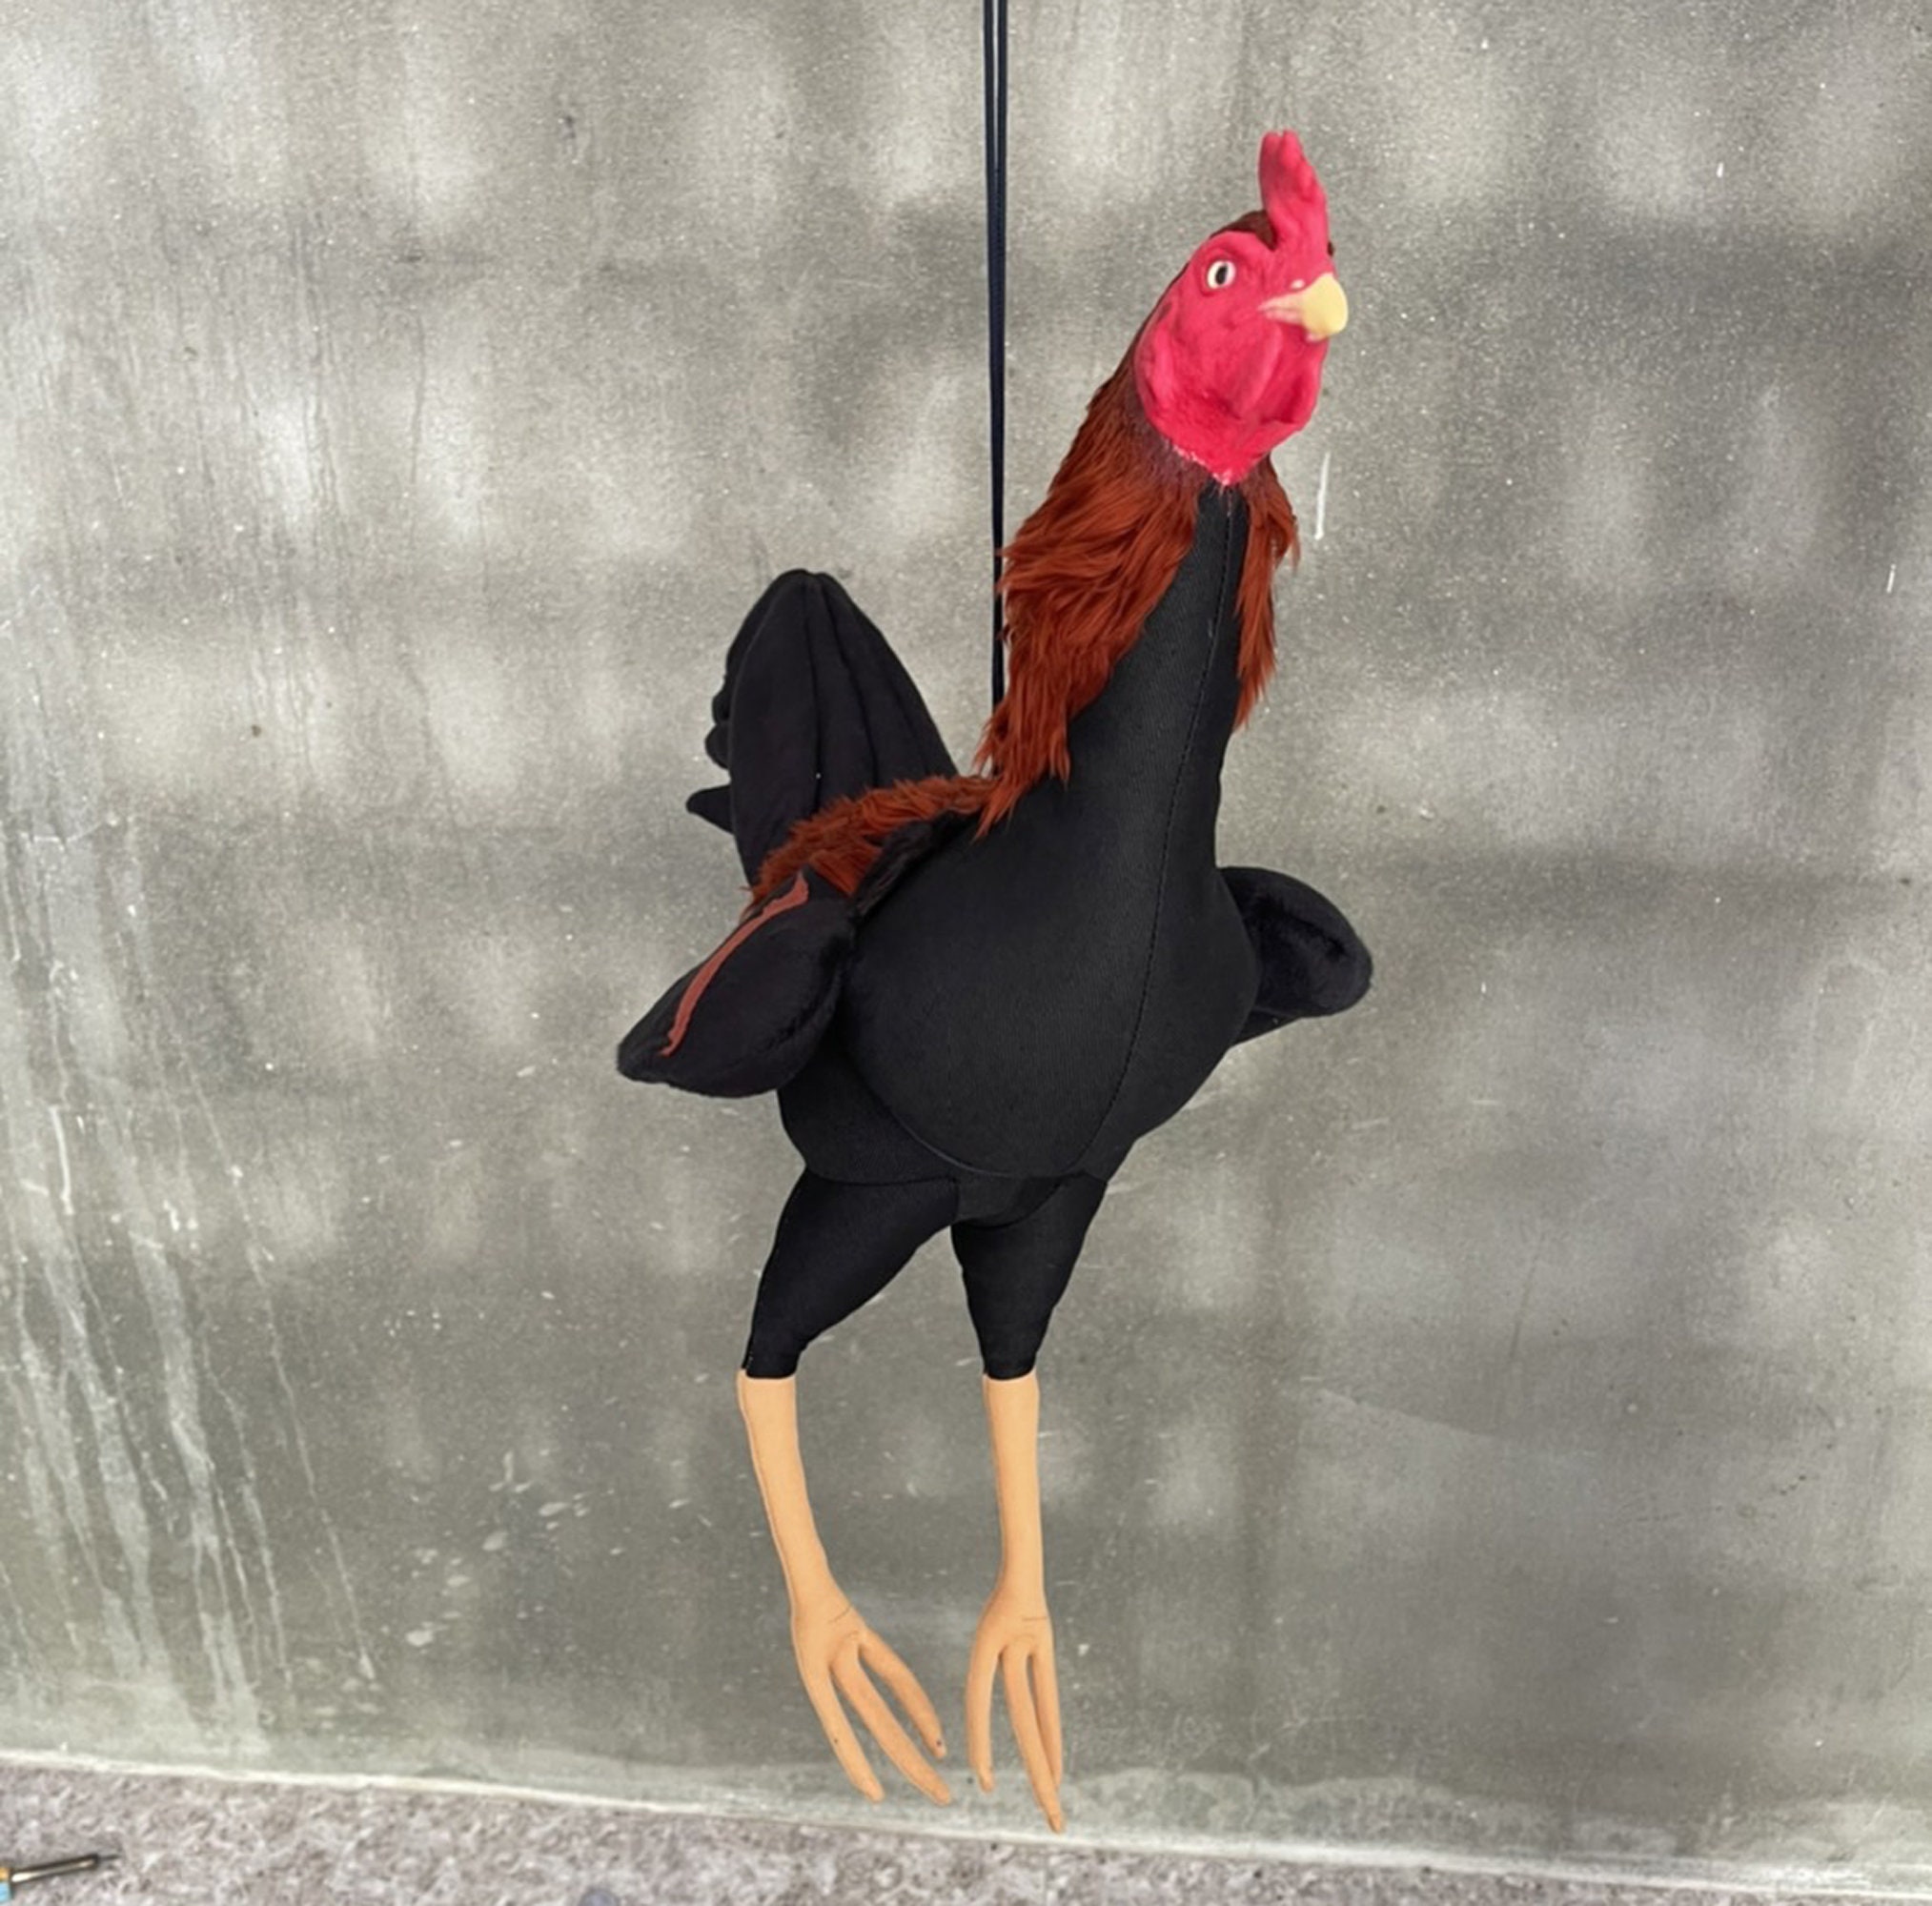 Chicken Doll Rooster Cock Realistic Silicone Training Equipment